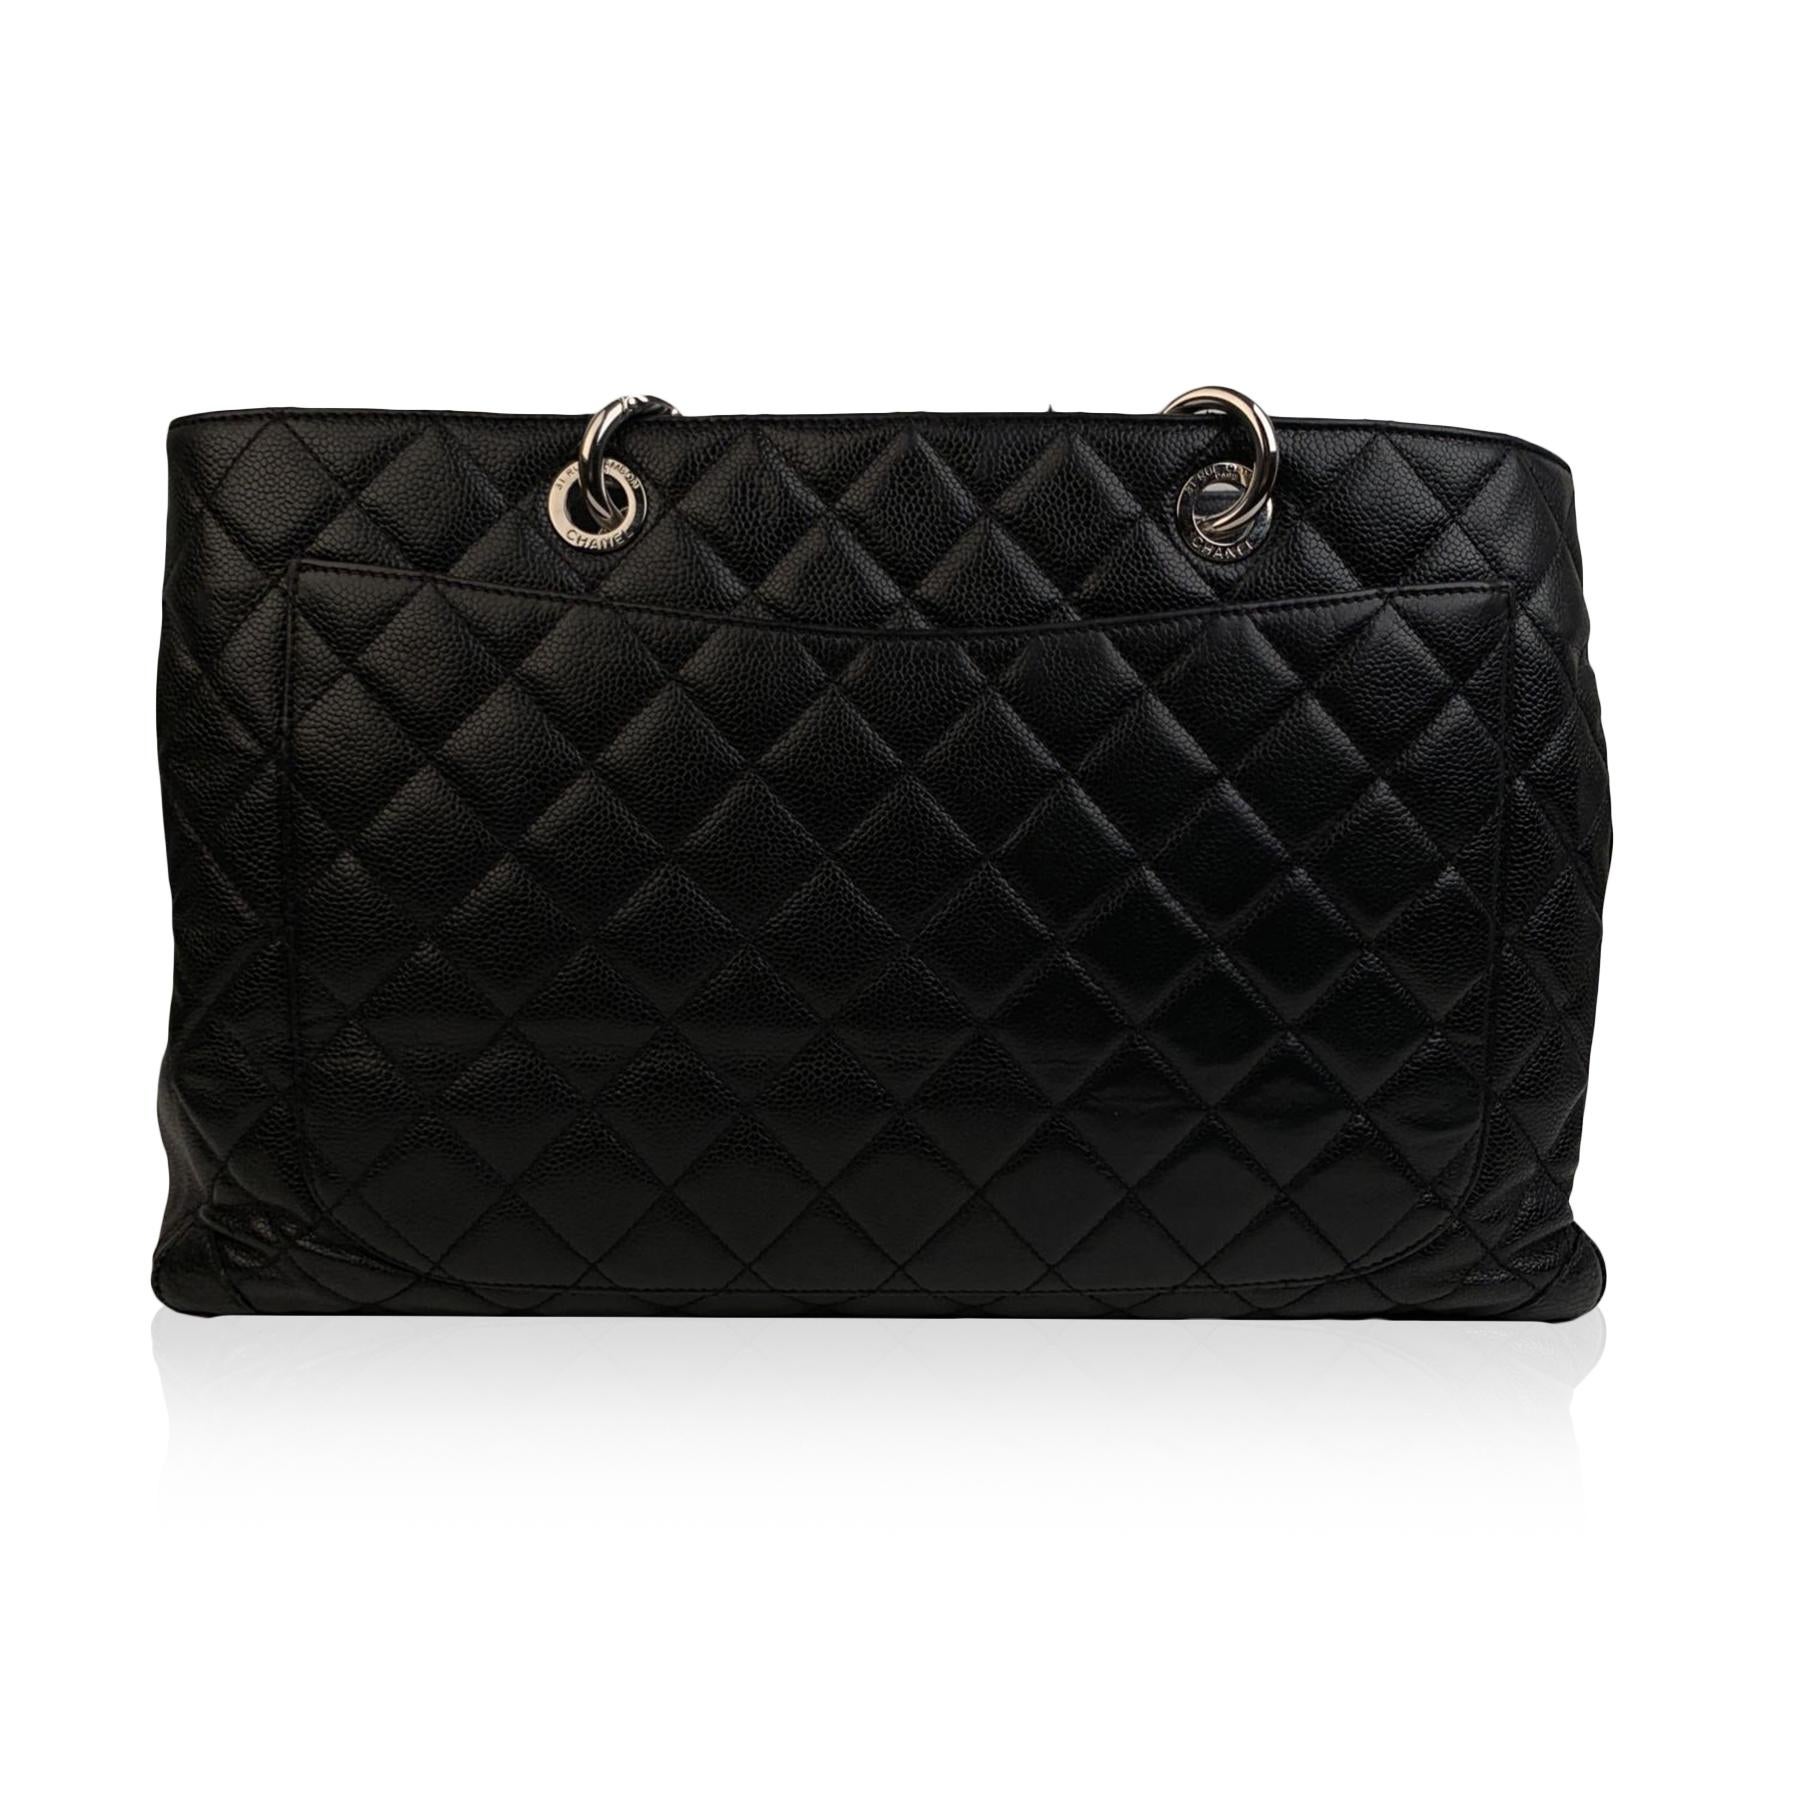 Chanel Black Caviar Quilted Leather Grand Shopping Tote GST Bag 3